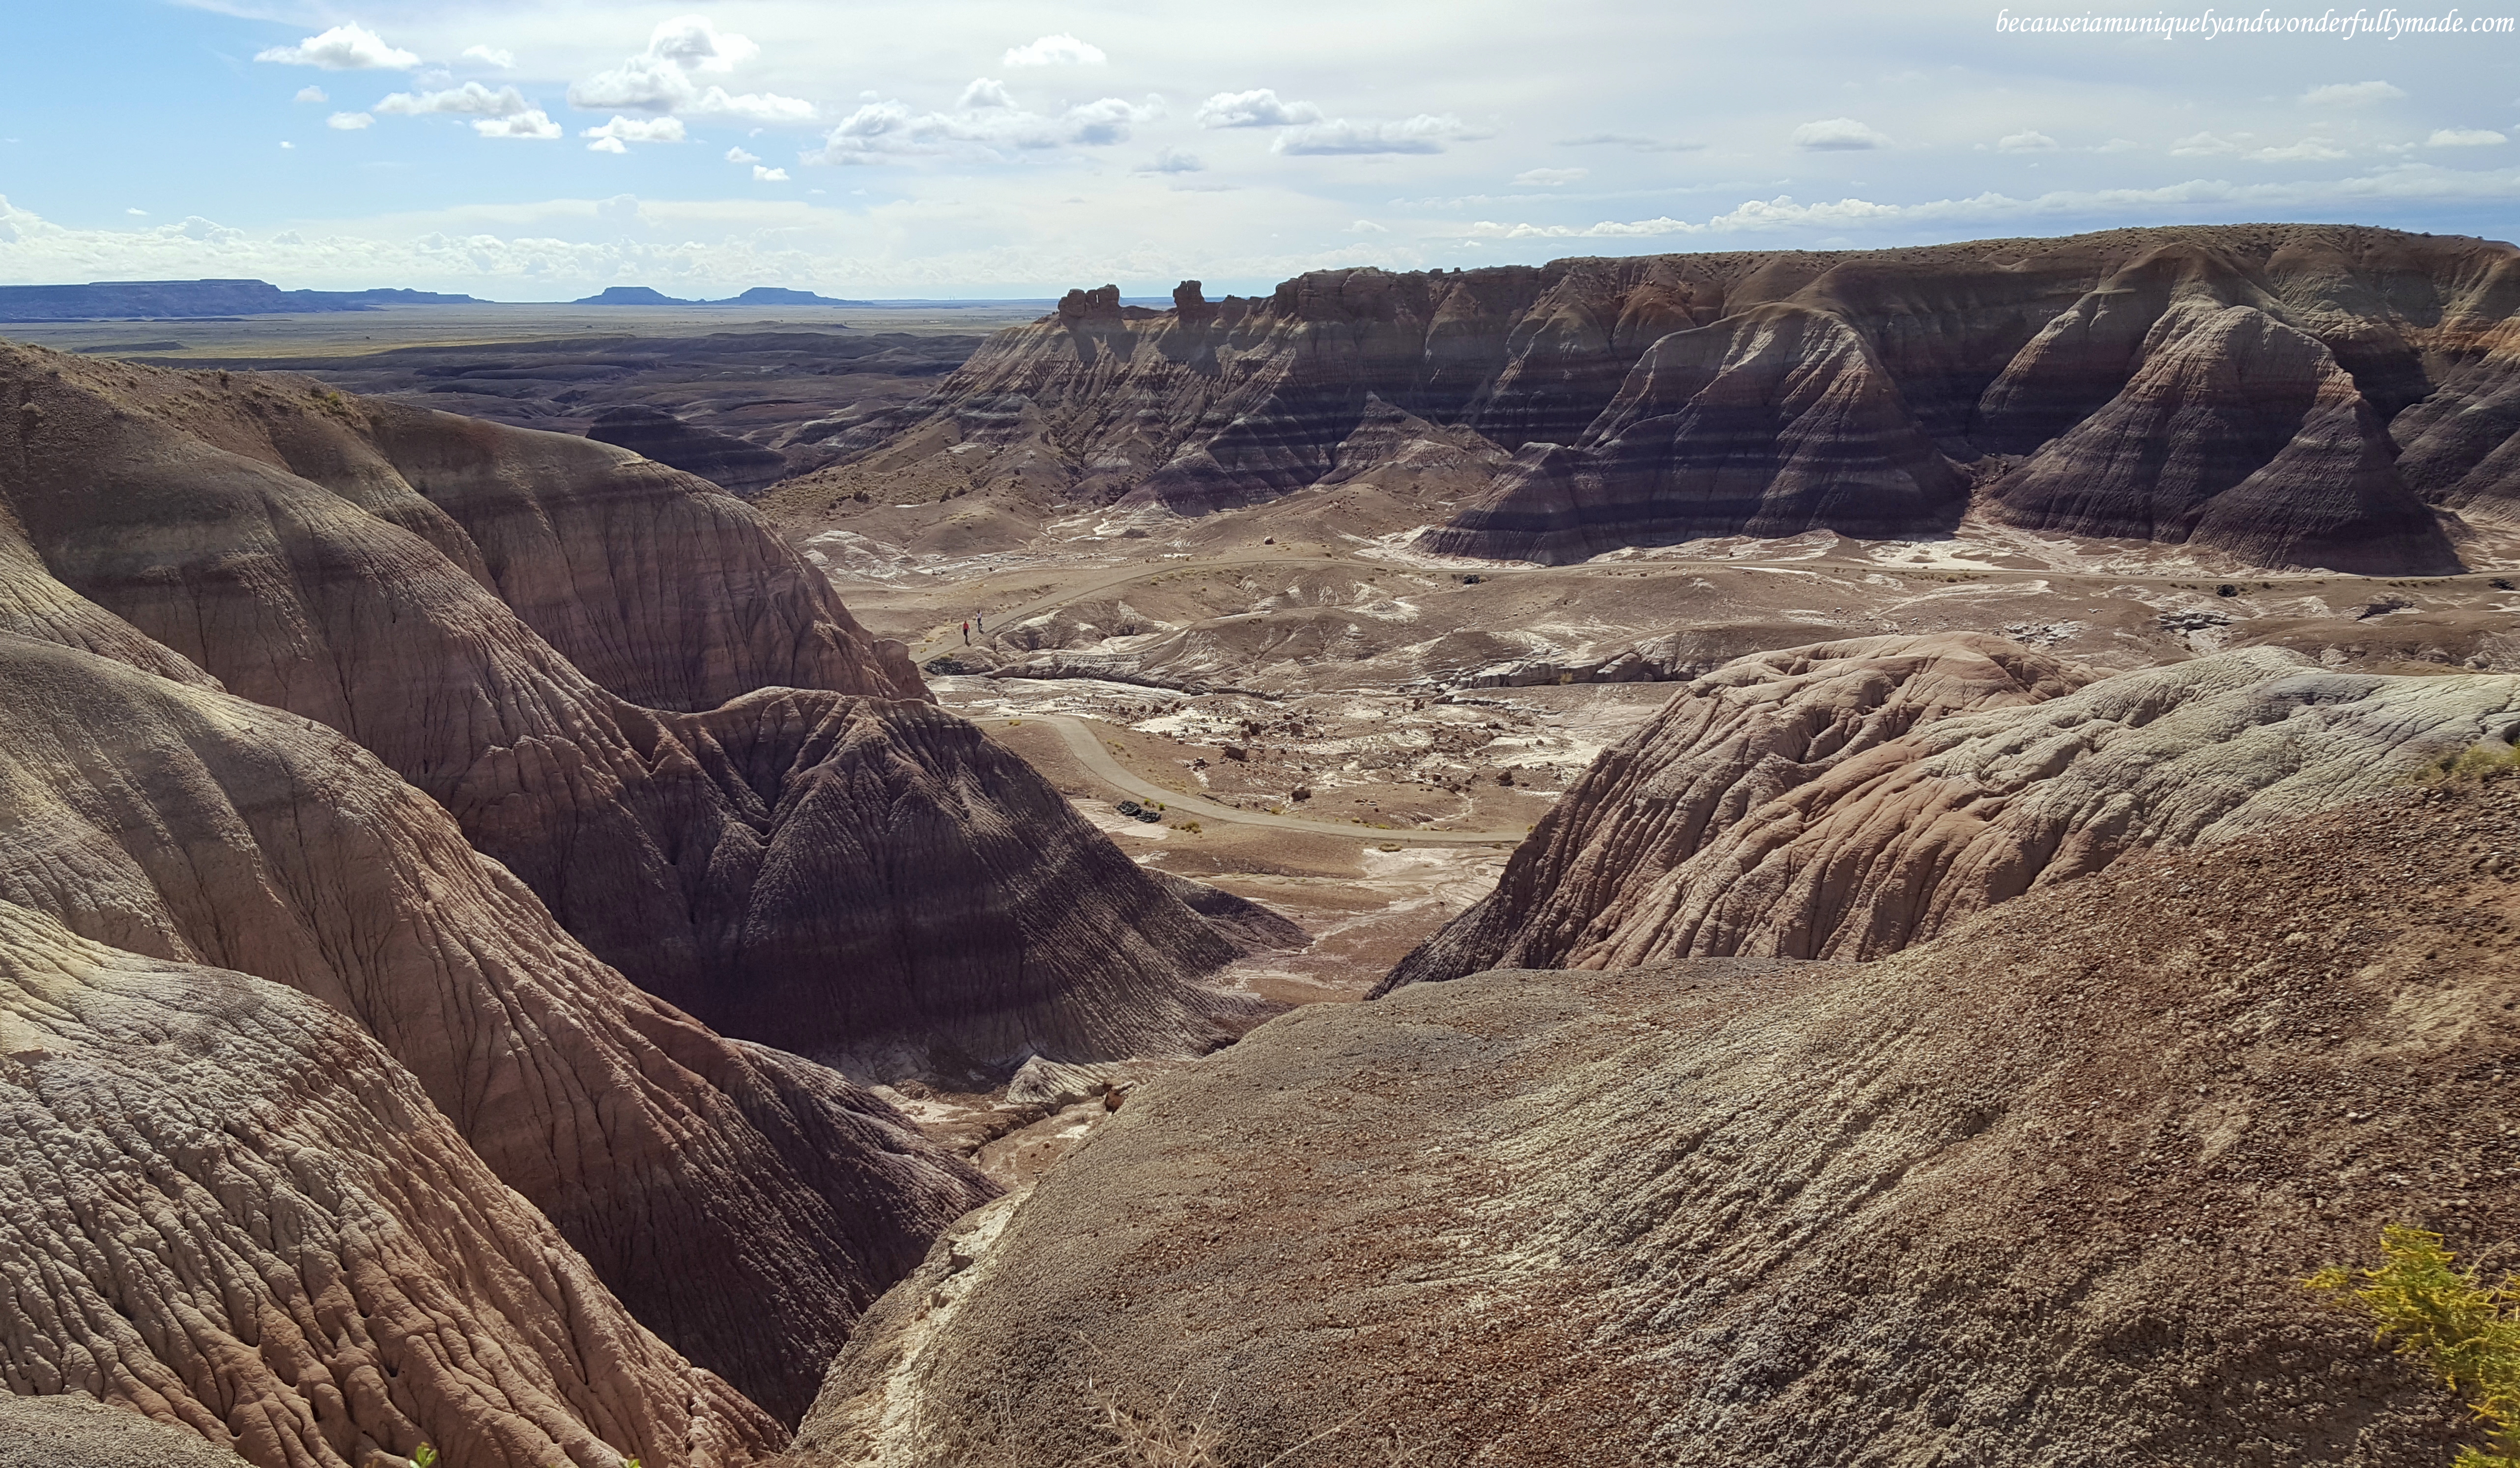 The beautiful badlands of Petrified Forest National Park in Arizona.